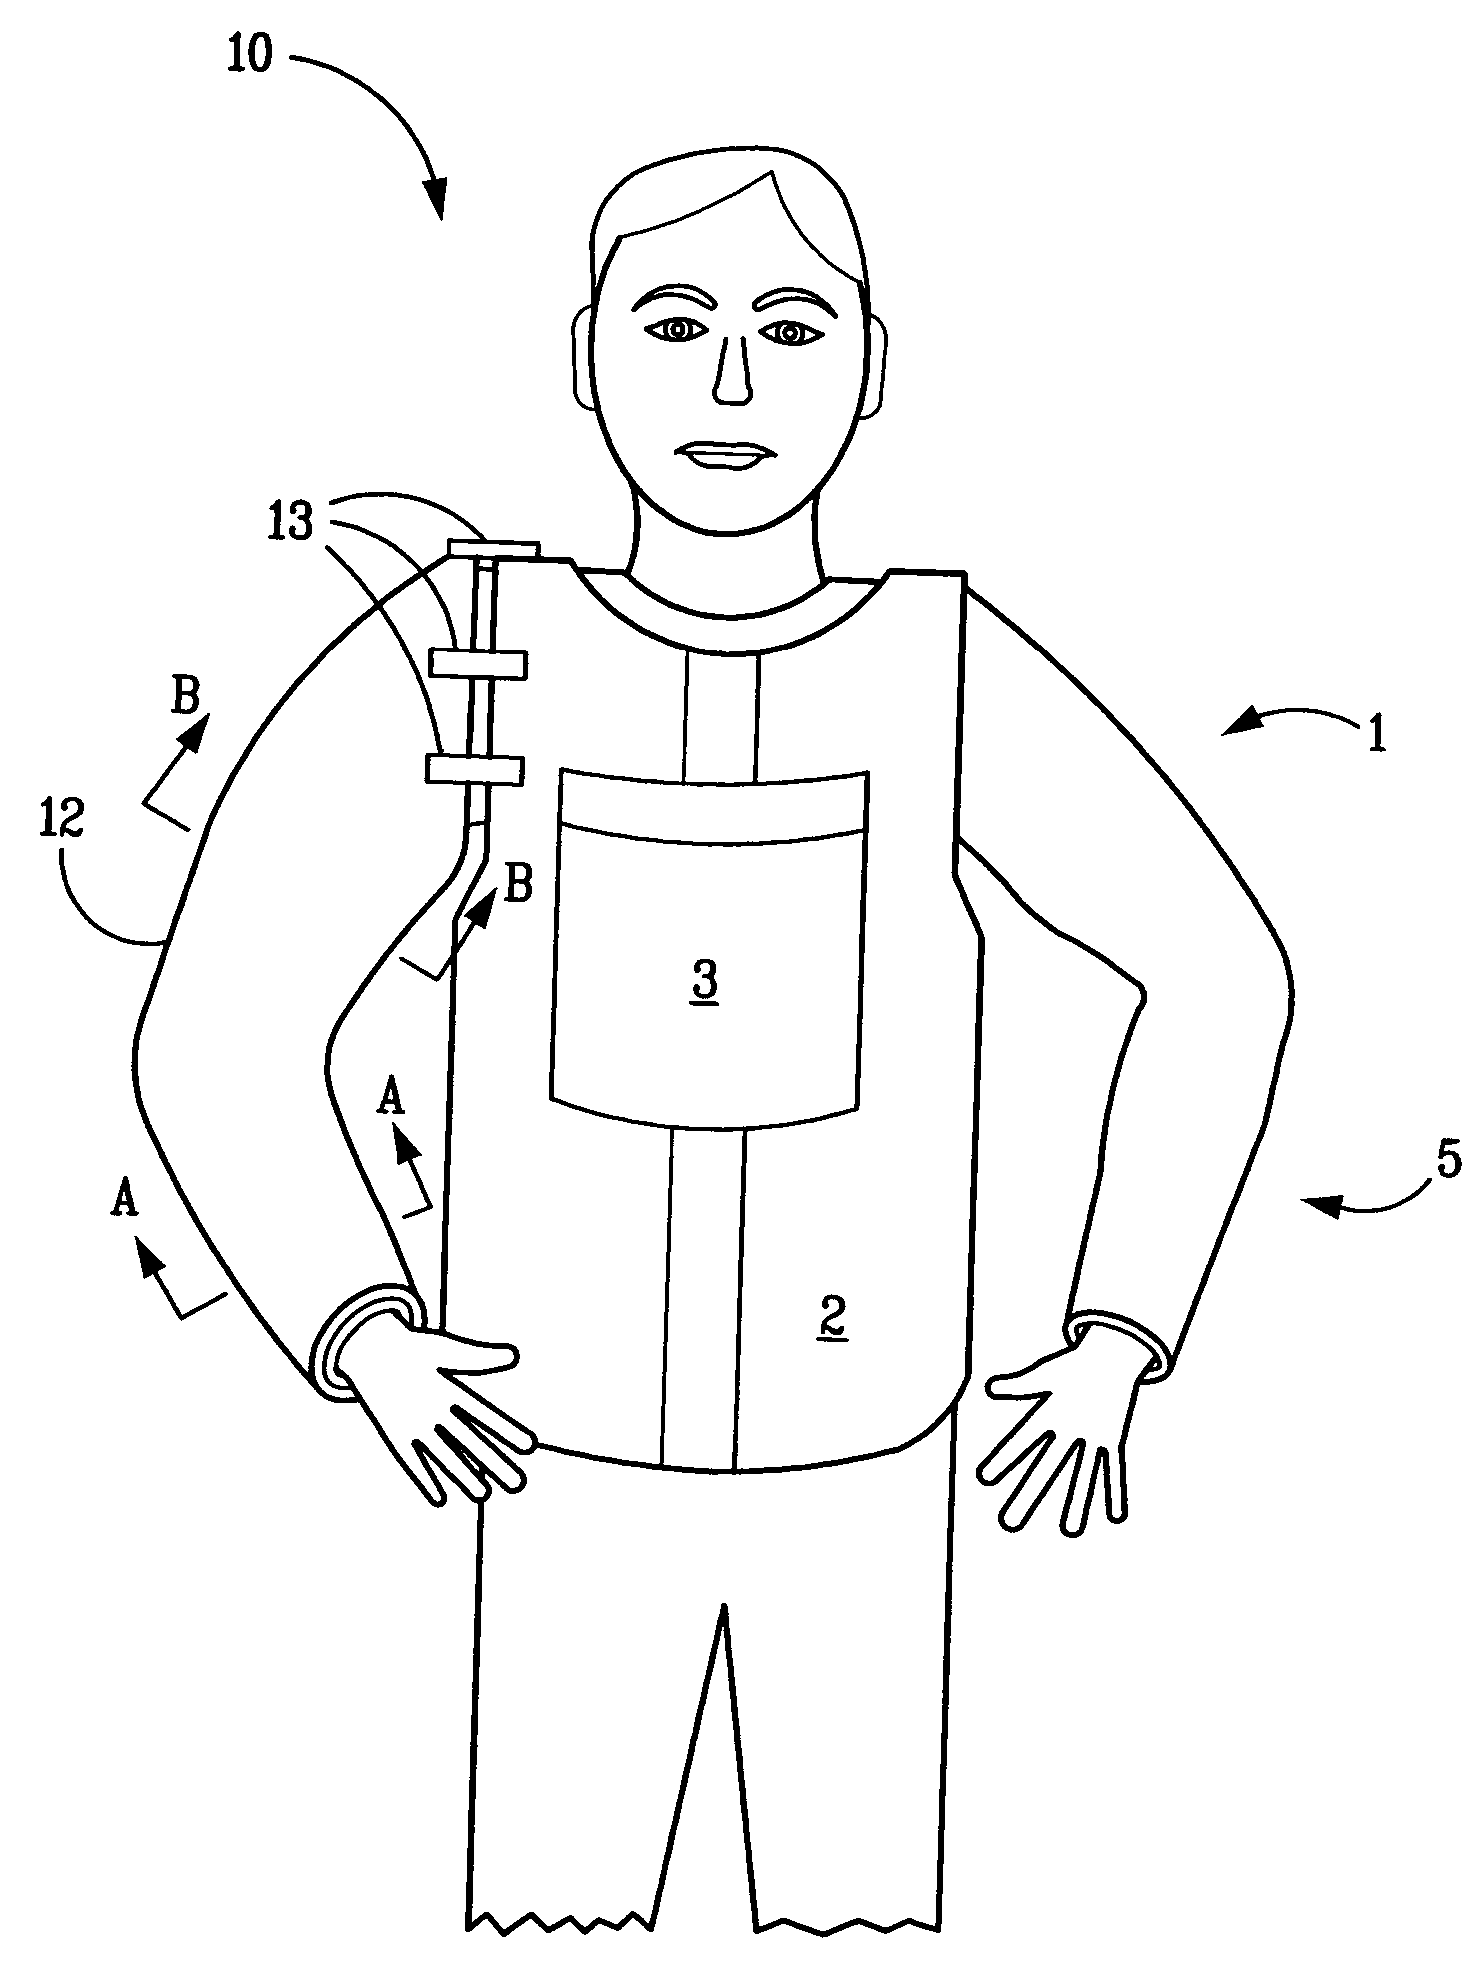 Armored garment for protecting